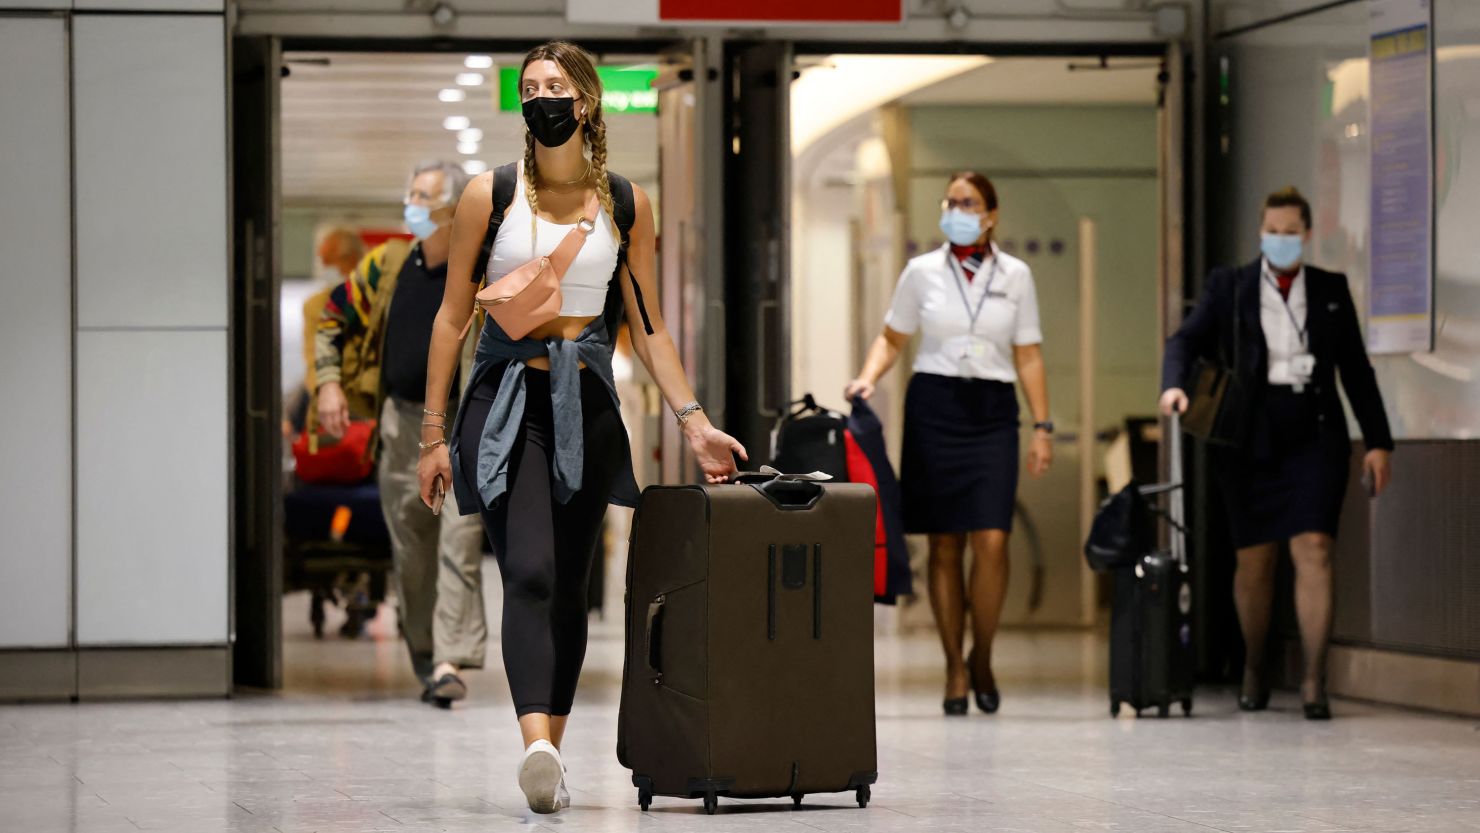 The UK's travel rules will change on October 4.